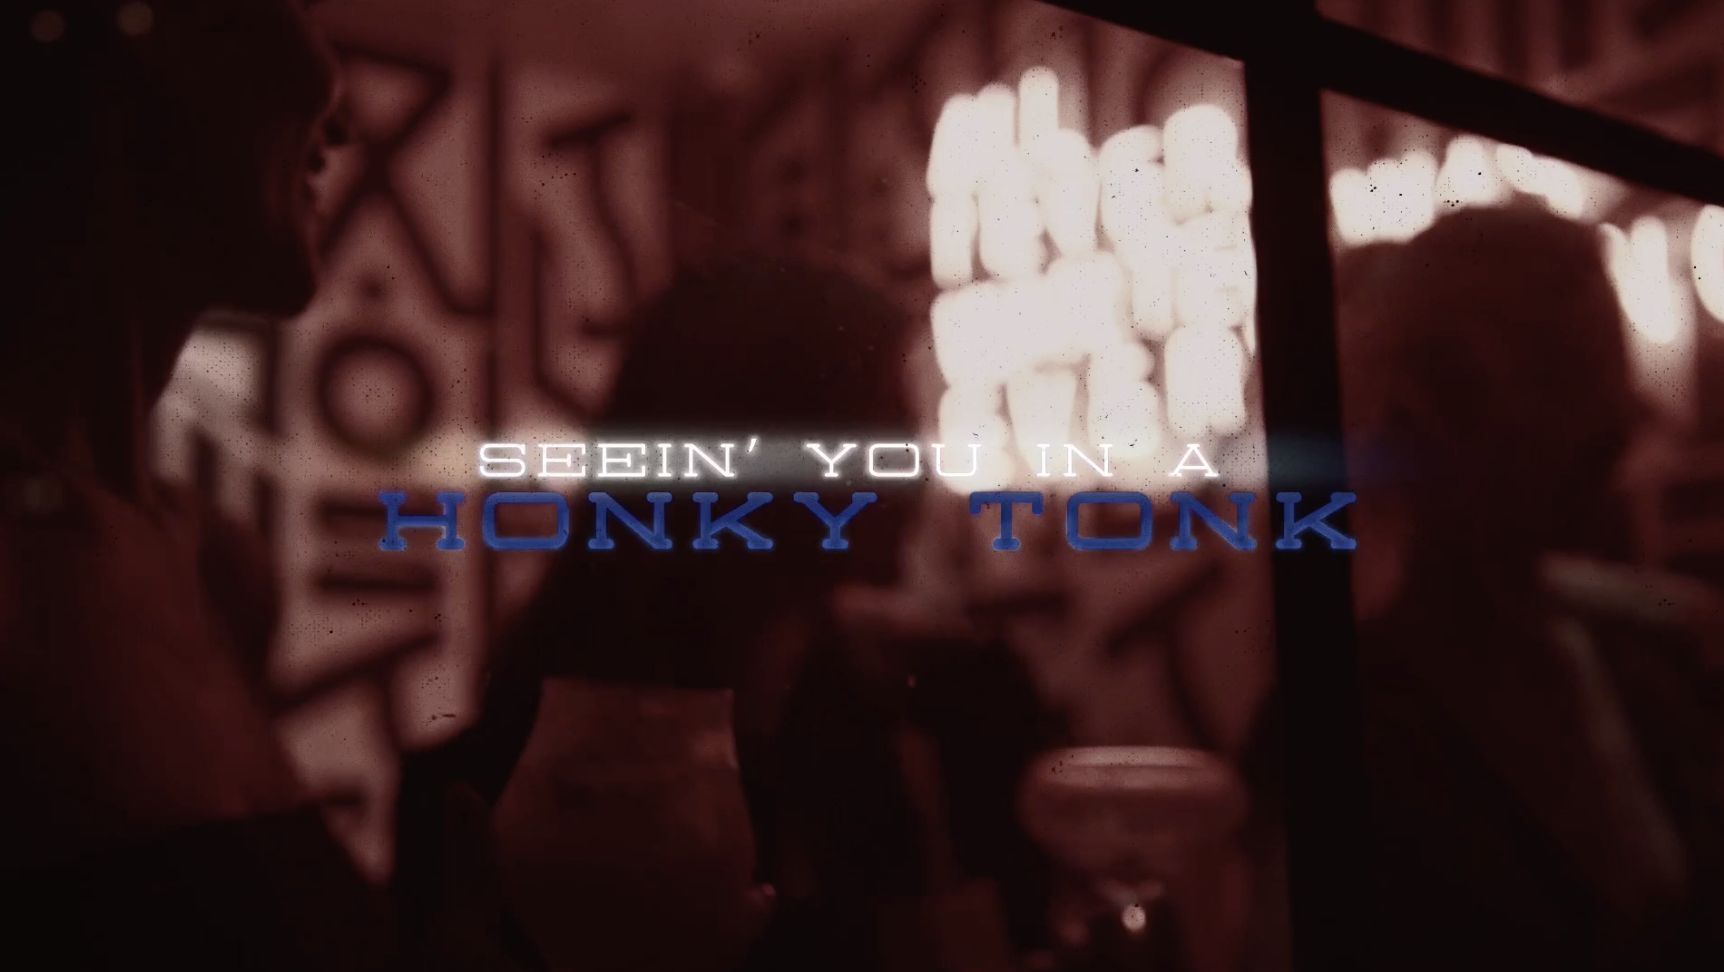 "You In A Honky Tonk" (Lyric Video)